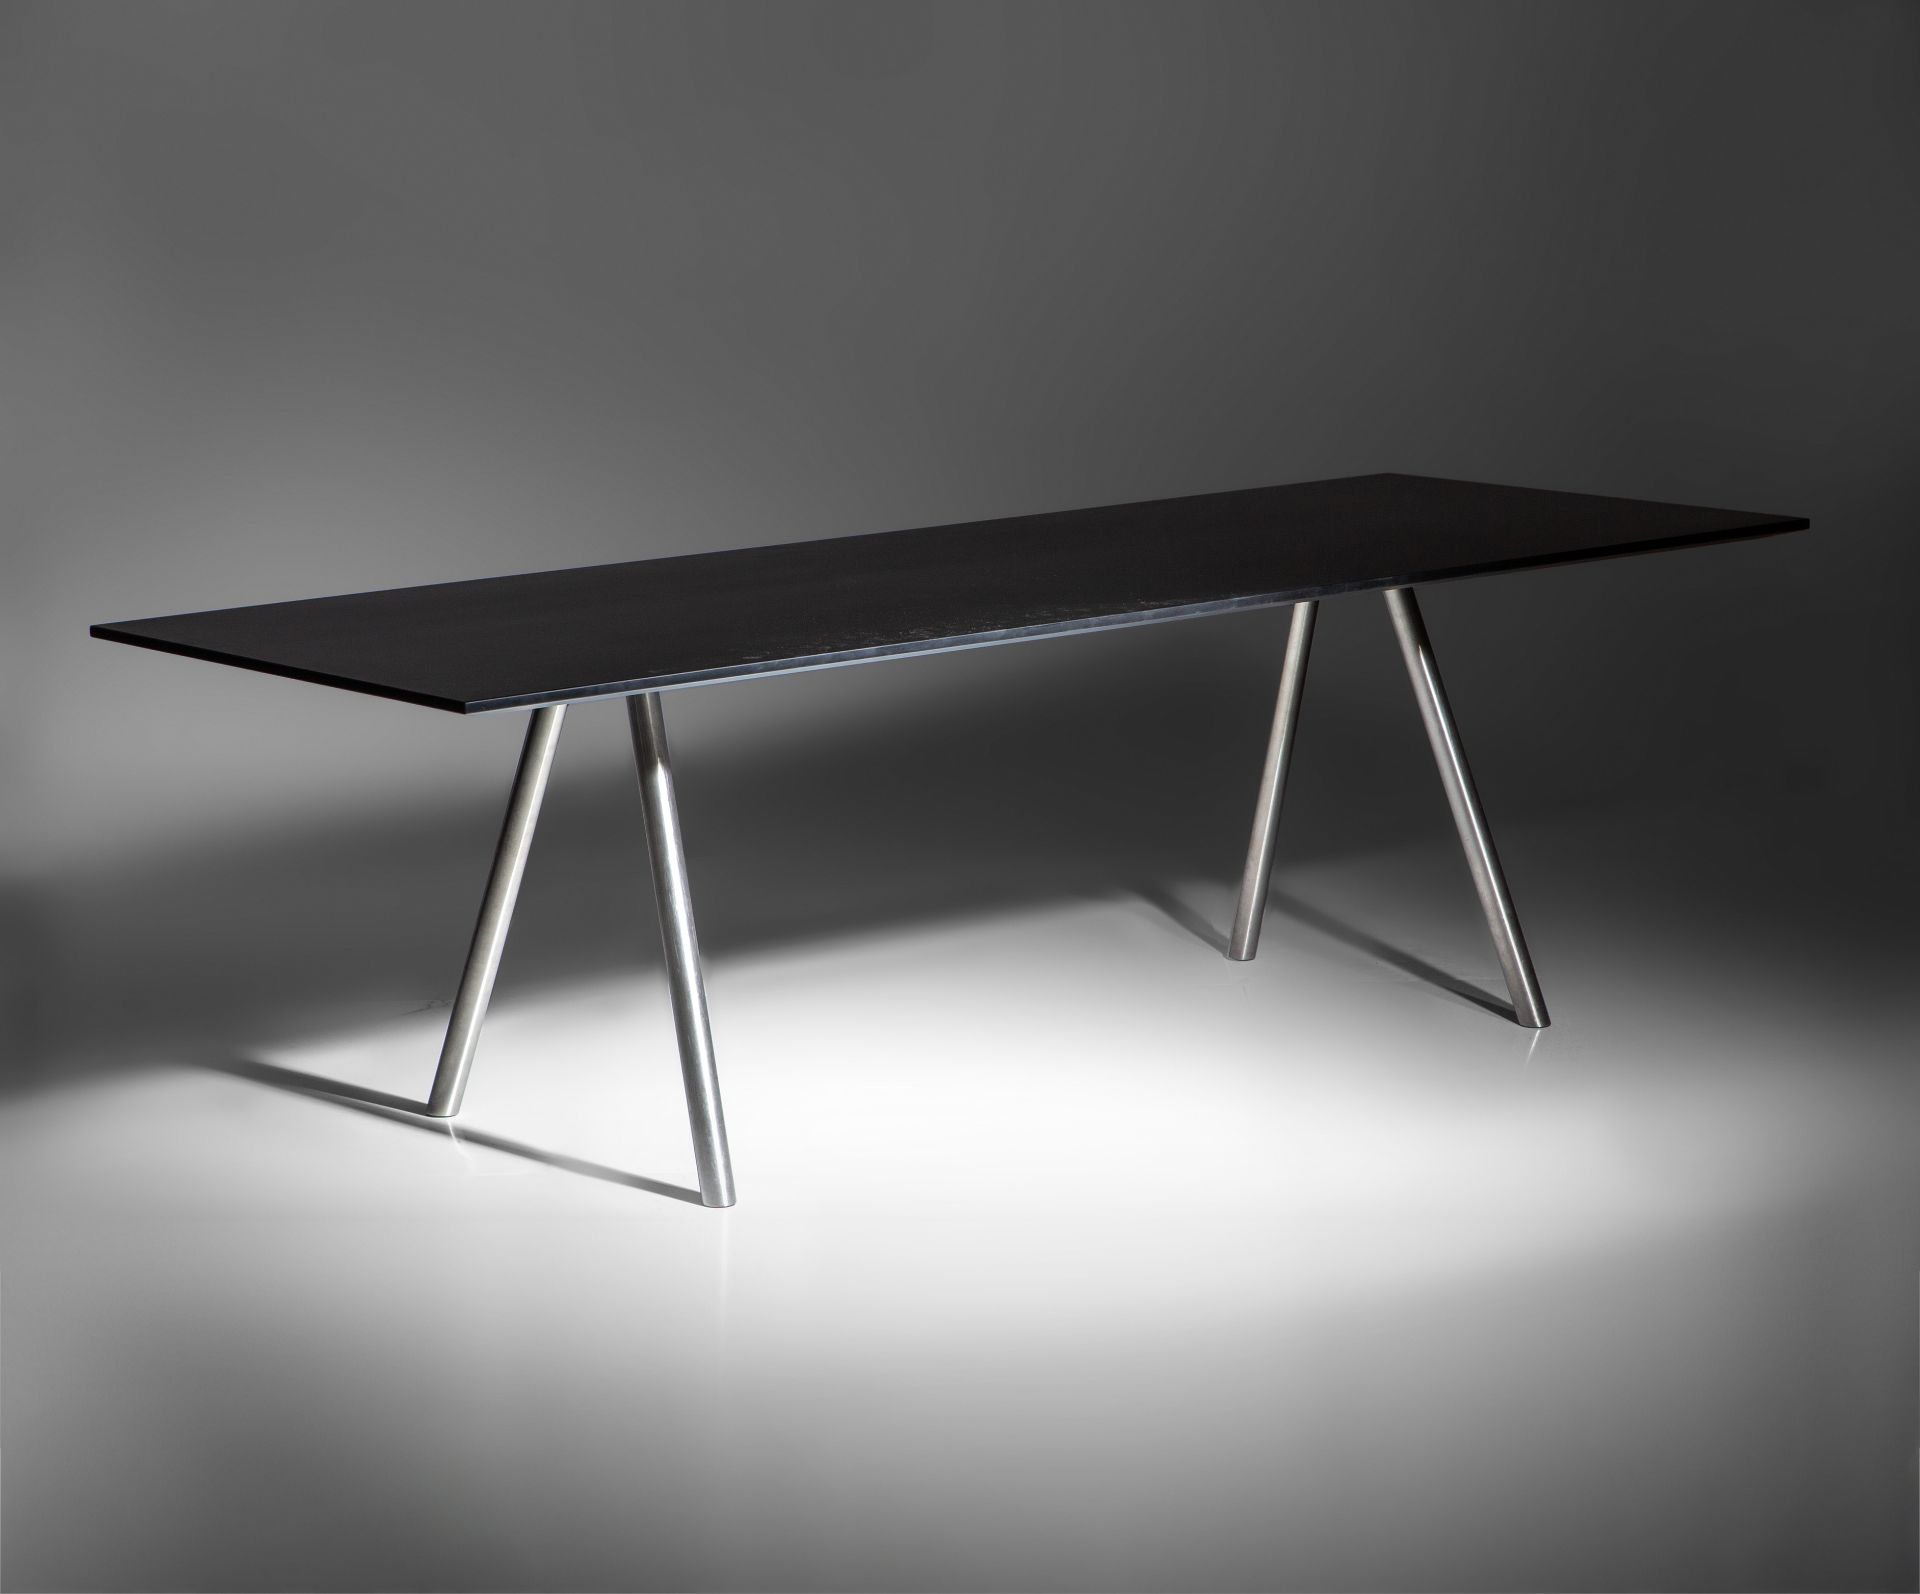 An A-Table by Maarten van Severen for Vitra, H 72,5 - W 240 - D 90 cm - Image 2 of 22